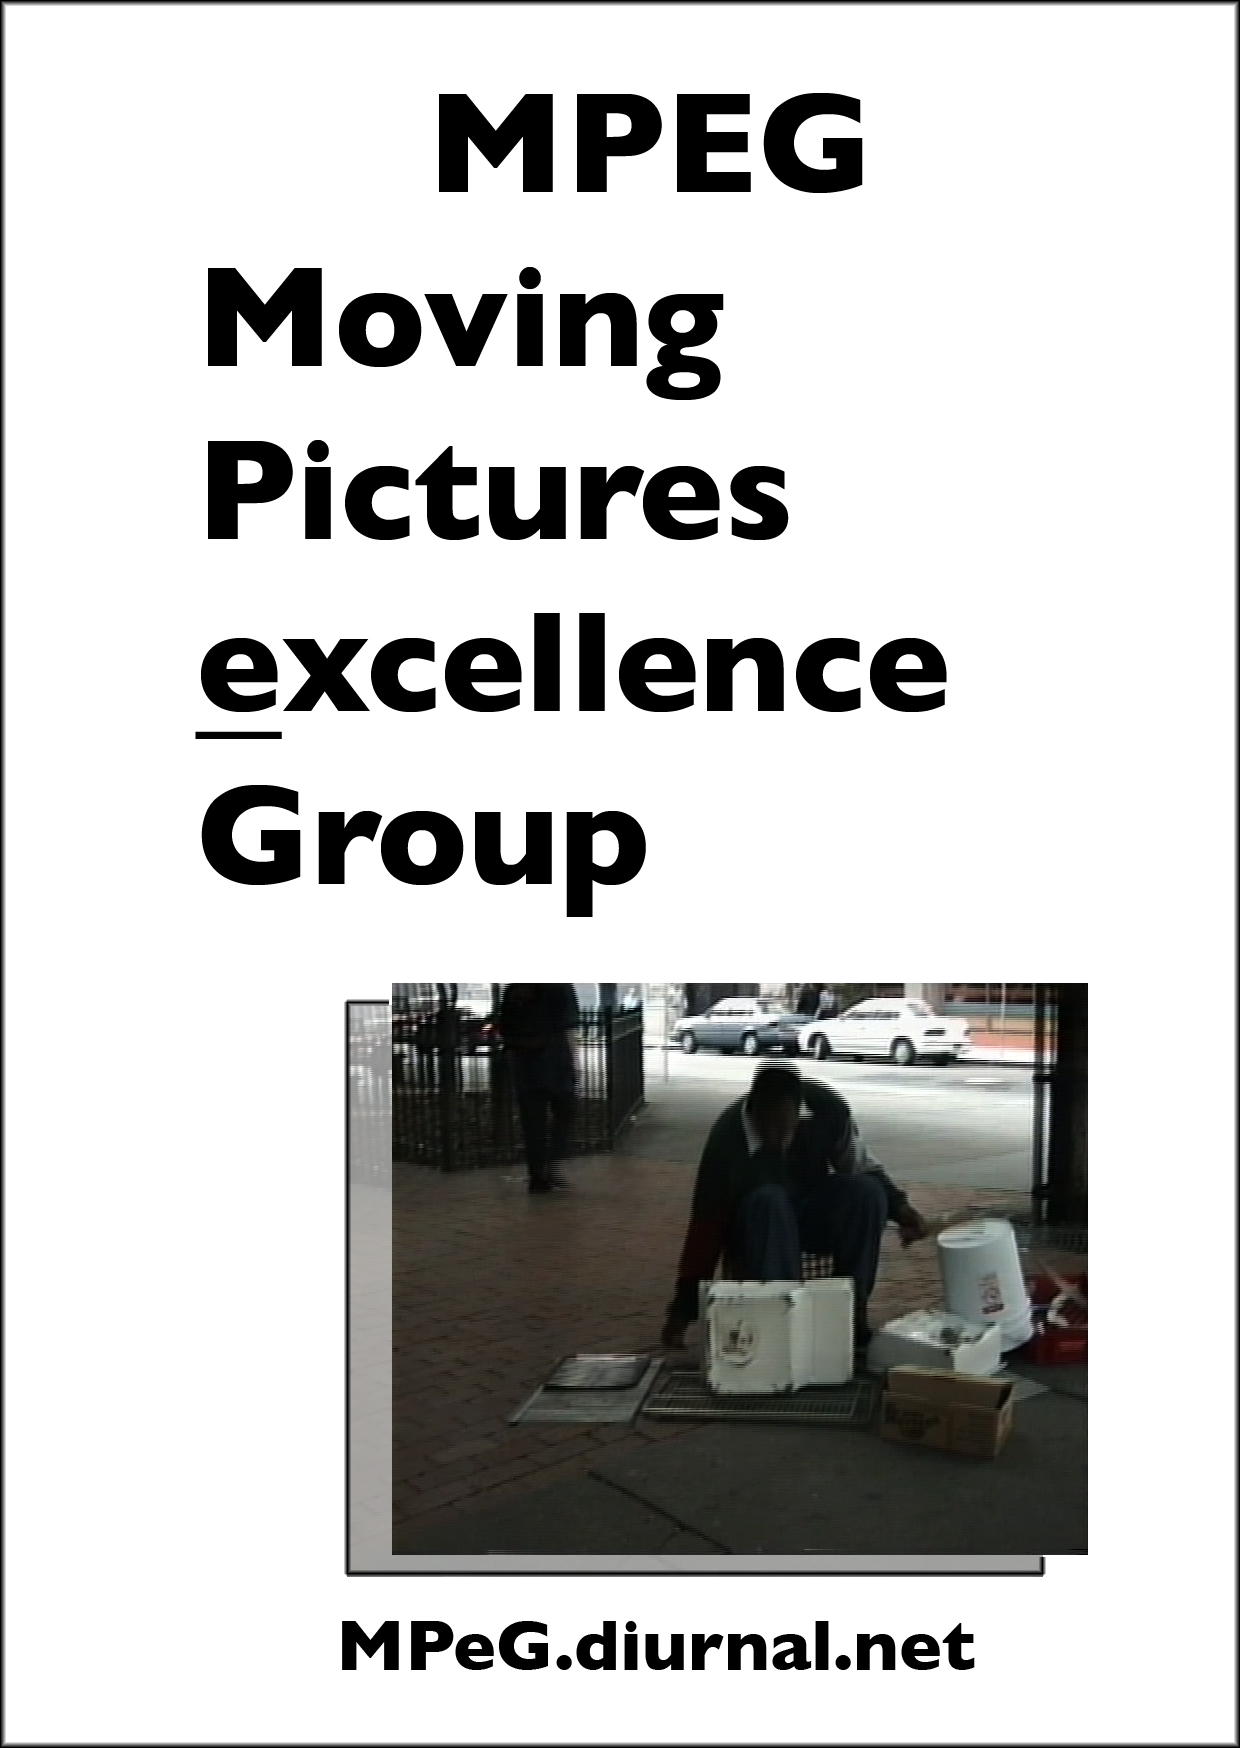 MovingPicturesexcellenceGroup